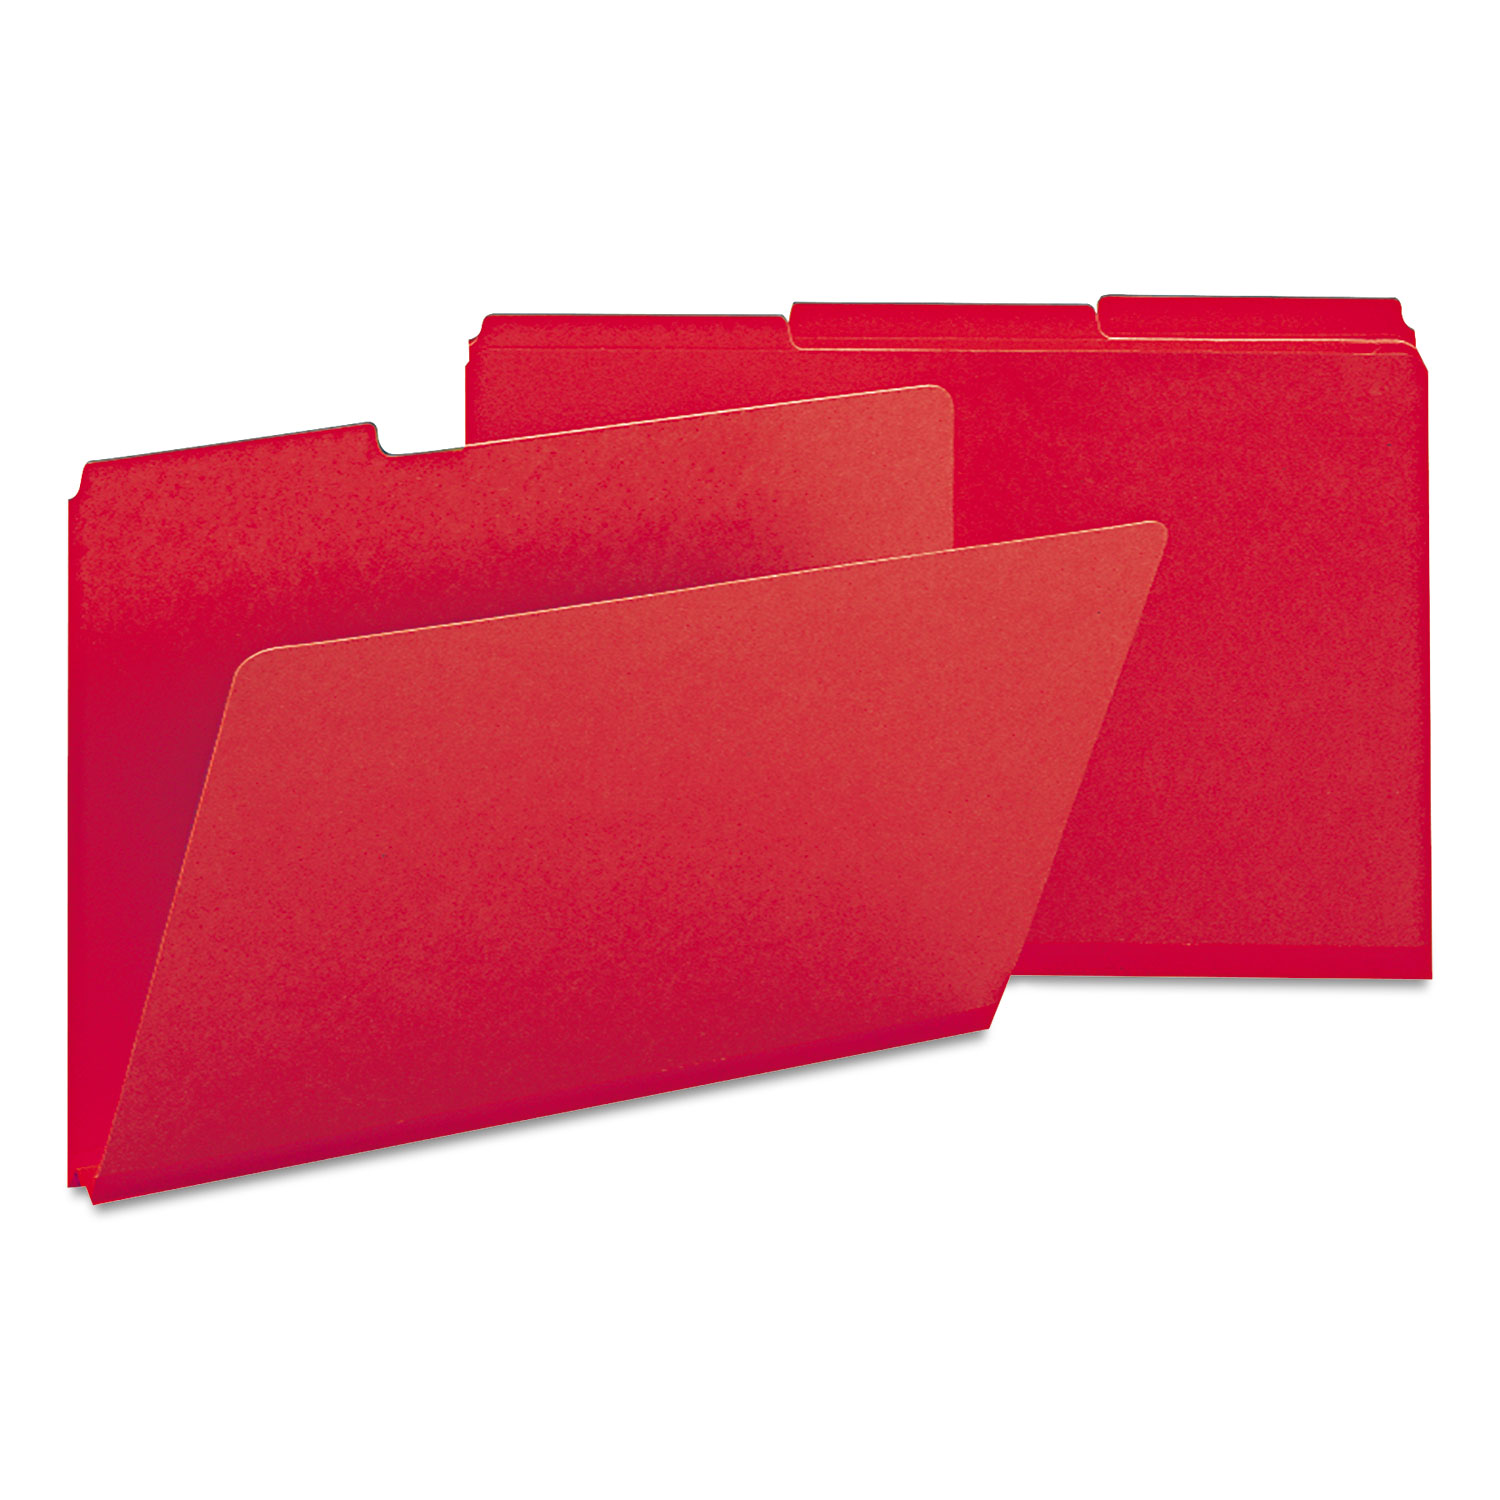  Smead 22538 Expanding Recycled Heavy Pressboard Folders, 1/3-Cut Tabs, 1 Expansion, Legal Size, Bright Red, 25/Box (SMD22538) 